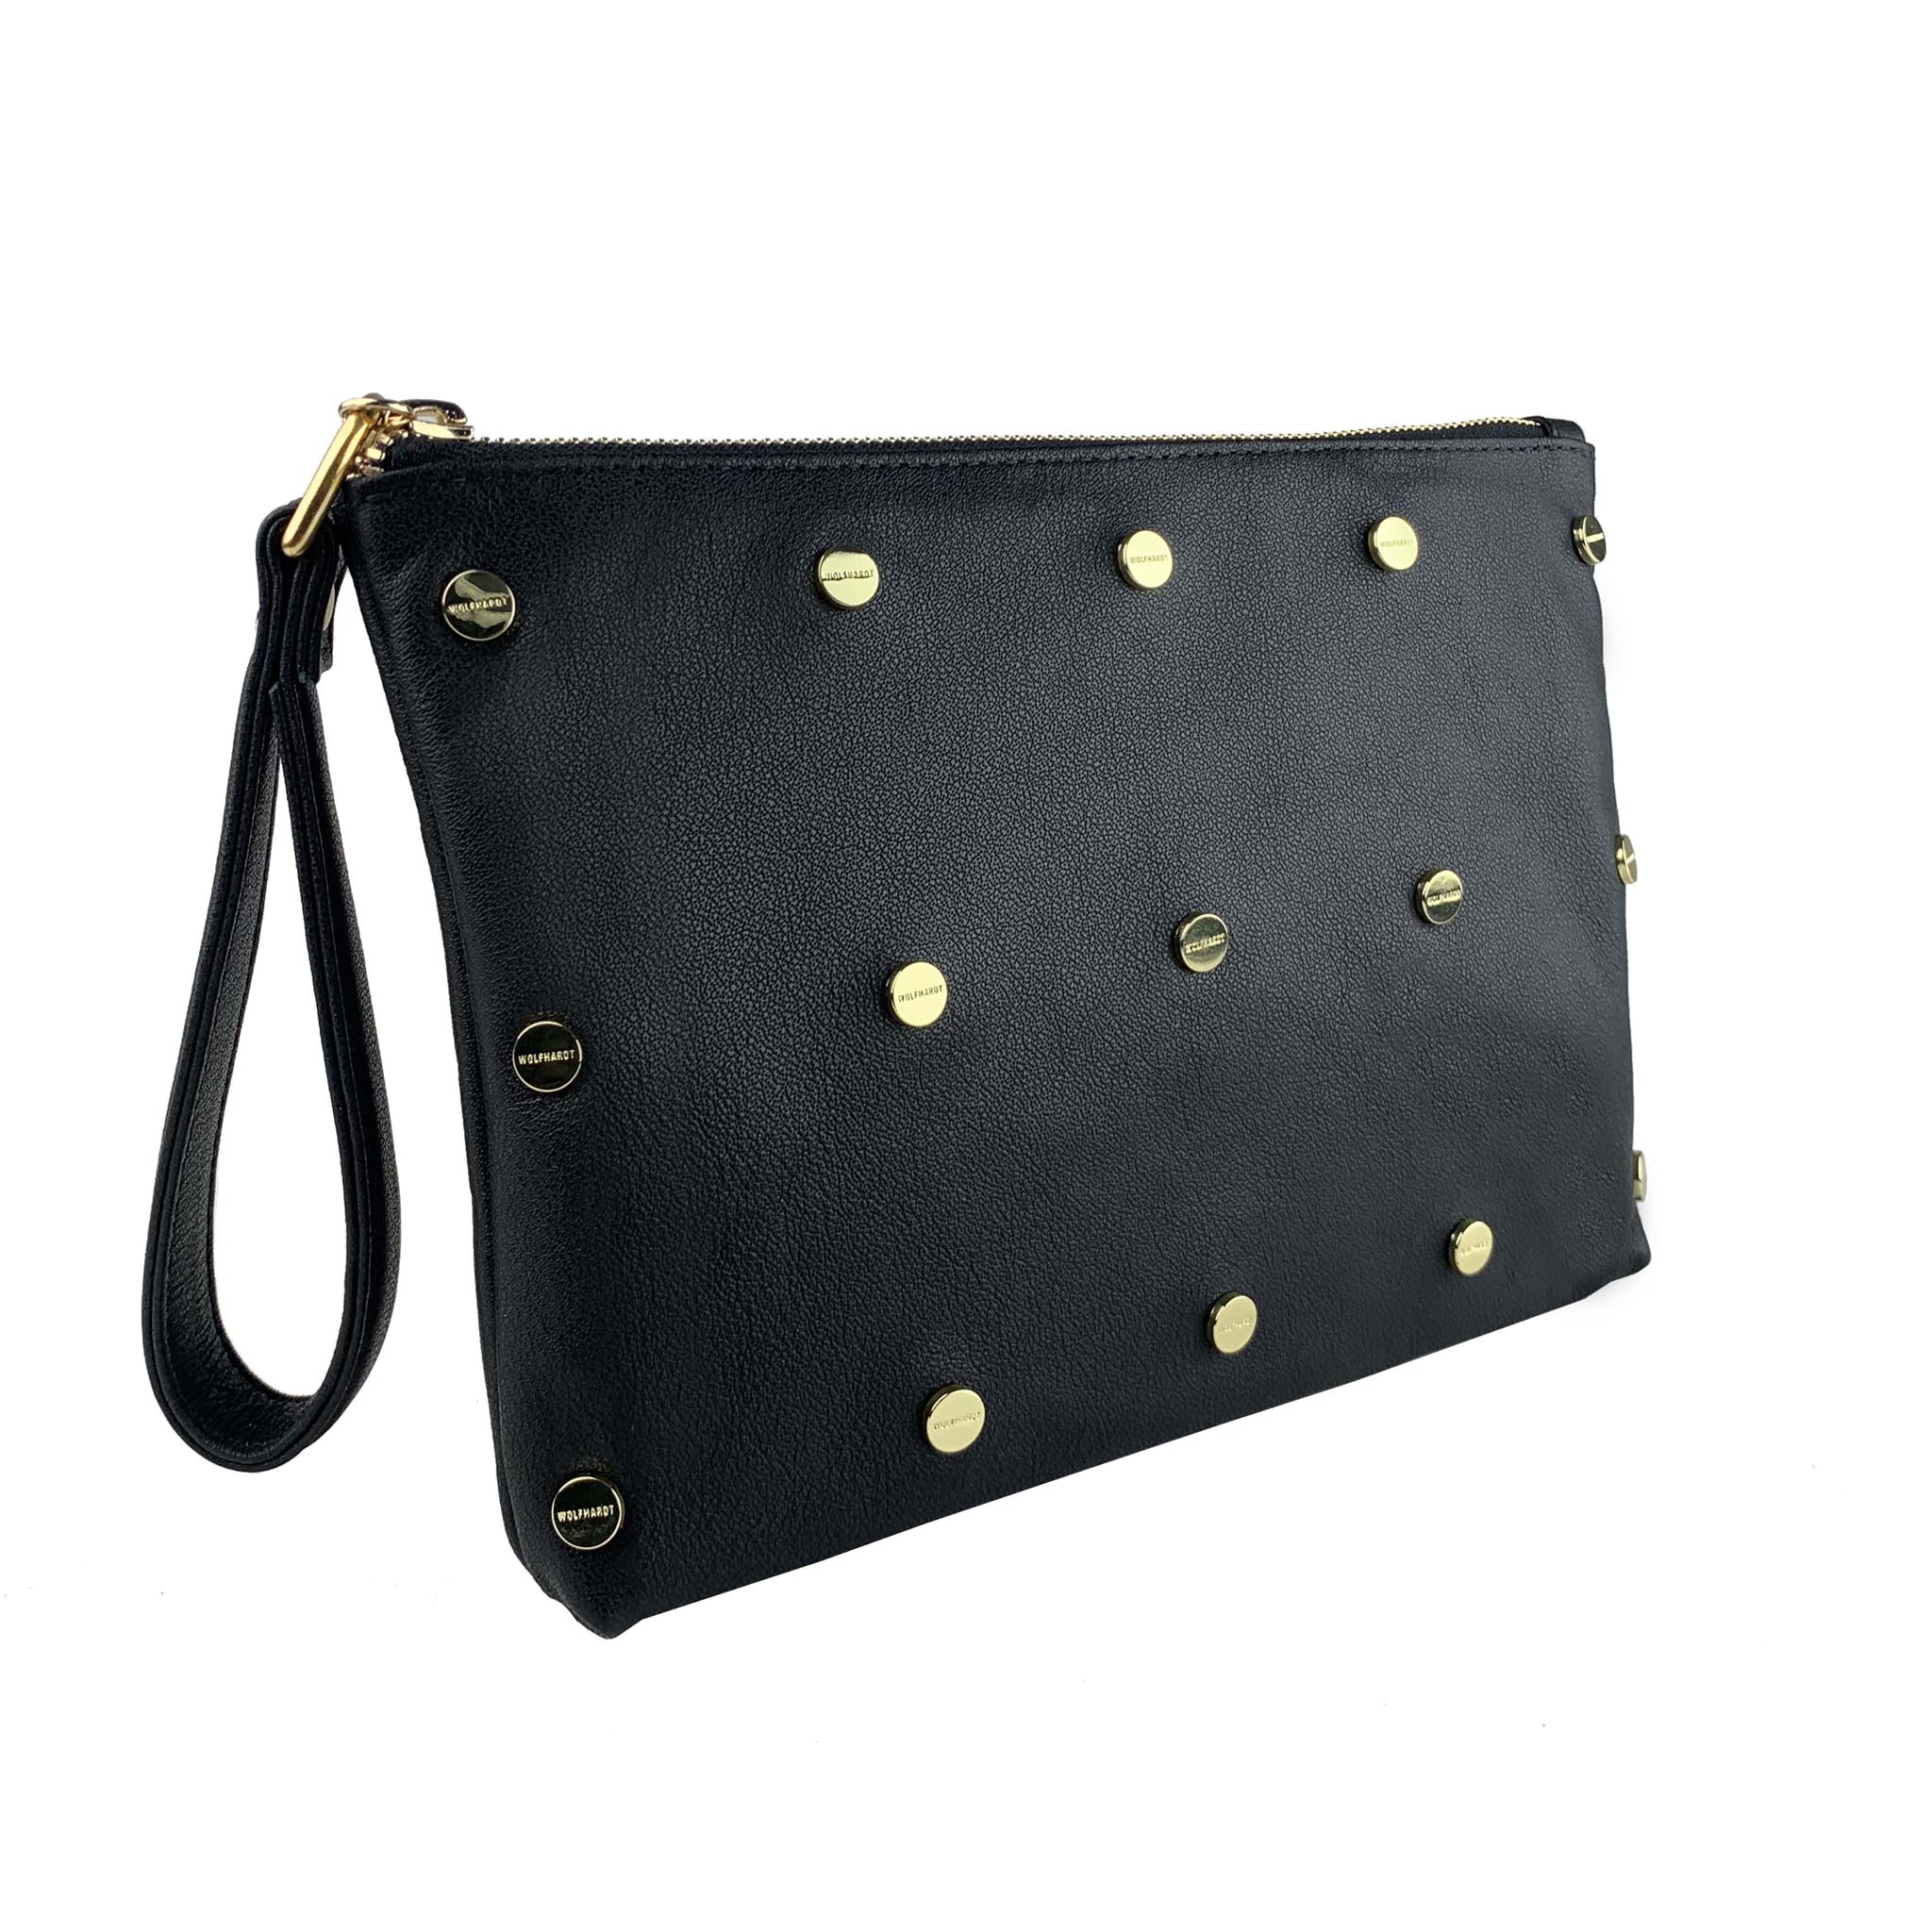 BLACK LEATHER WOMEN'S STUDDED BEUTAL FLAT ZIP POUCH